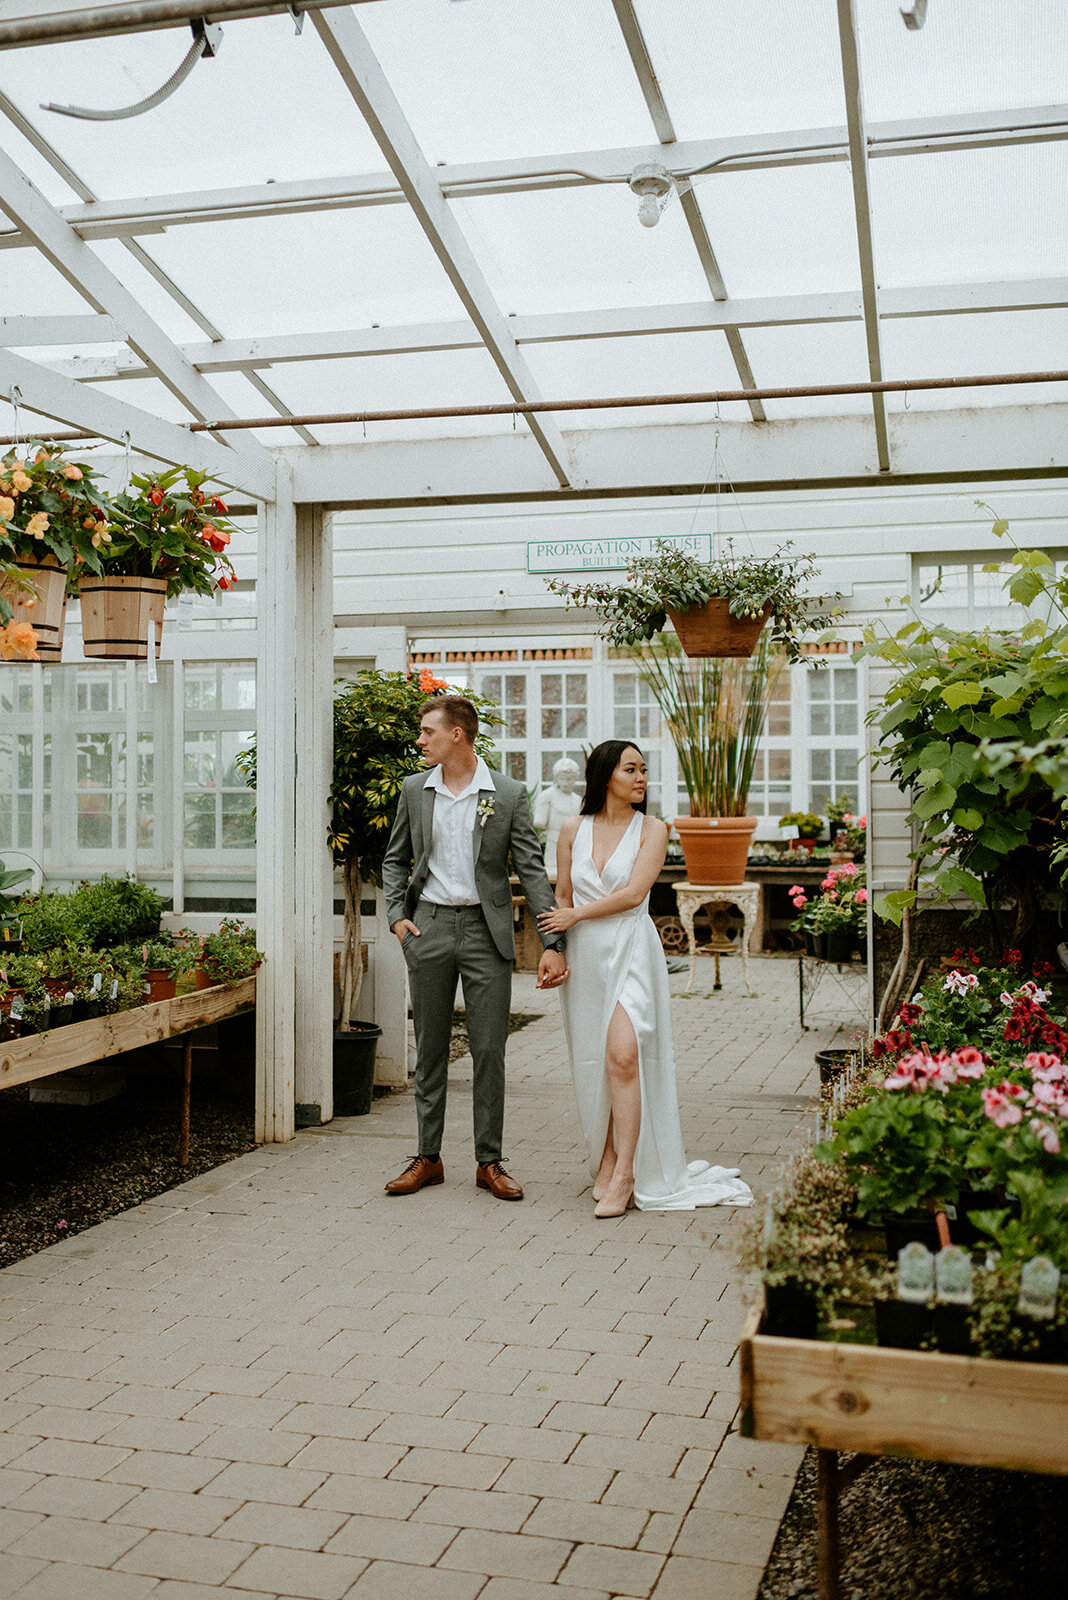  Intimate styled wedding in The Label RAIN wedding gown by a&amp;bé x anna bé bridal shop photographed by Emily Noelle Photography 